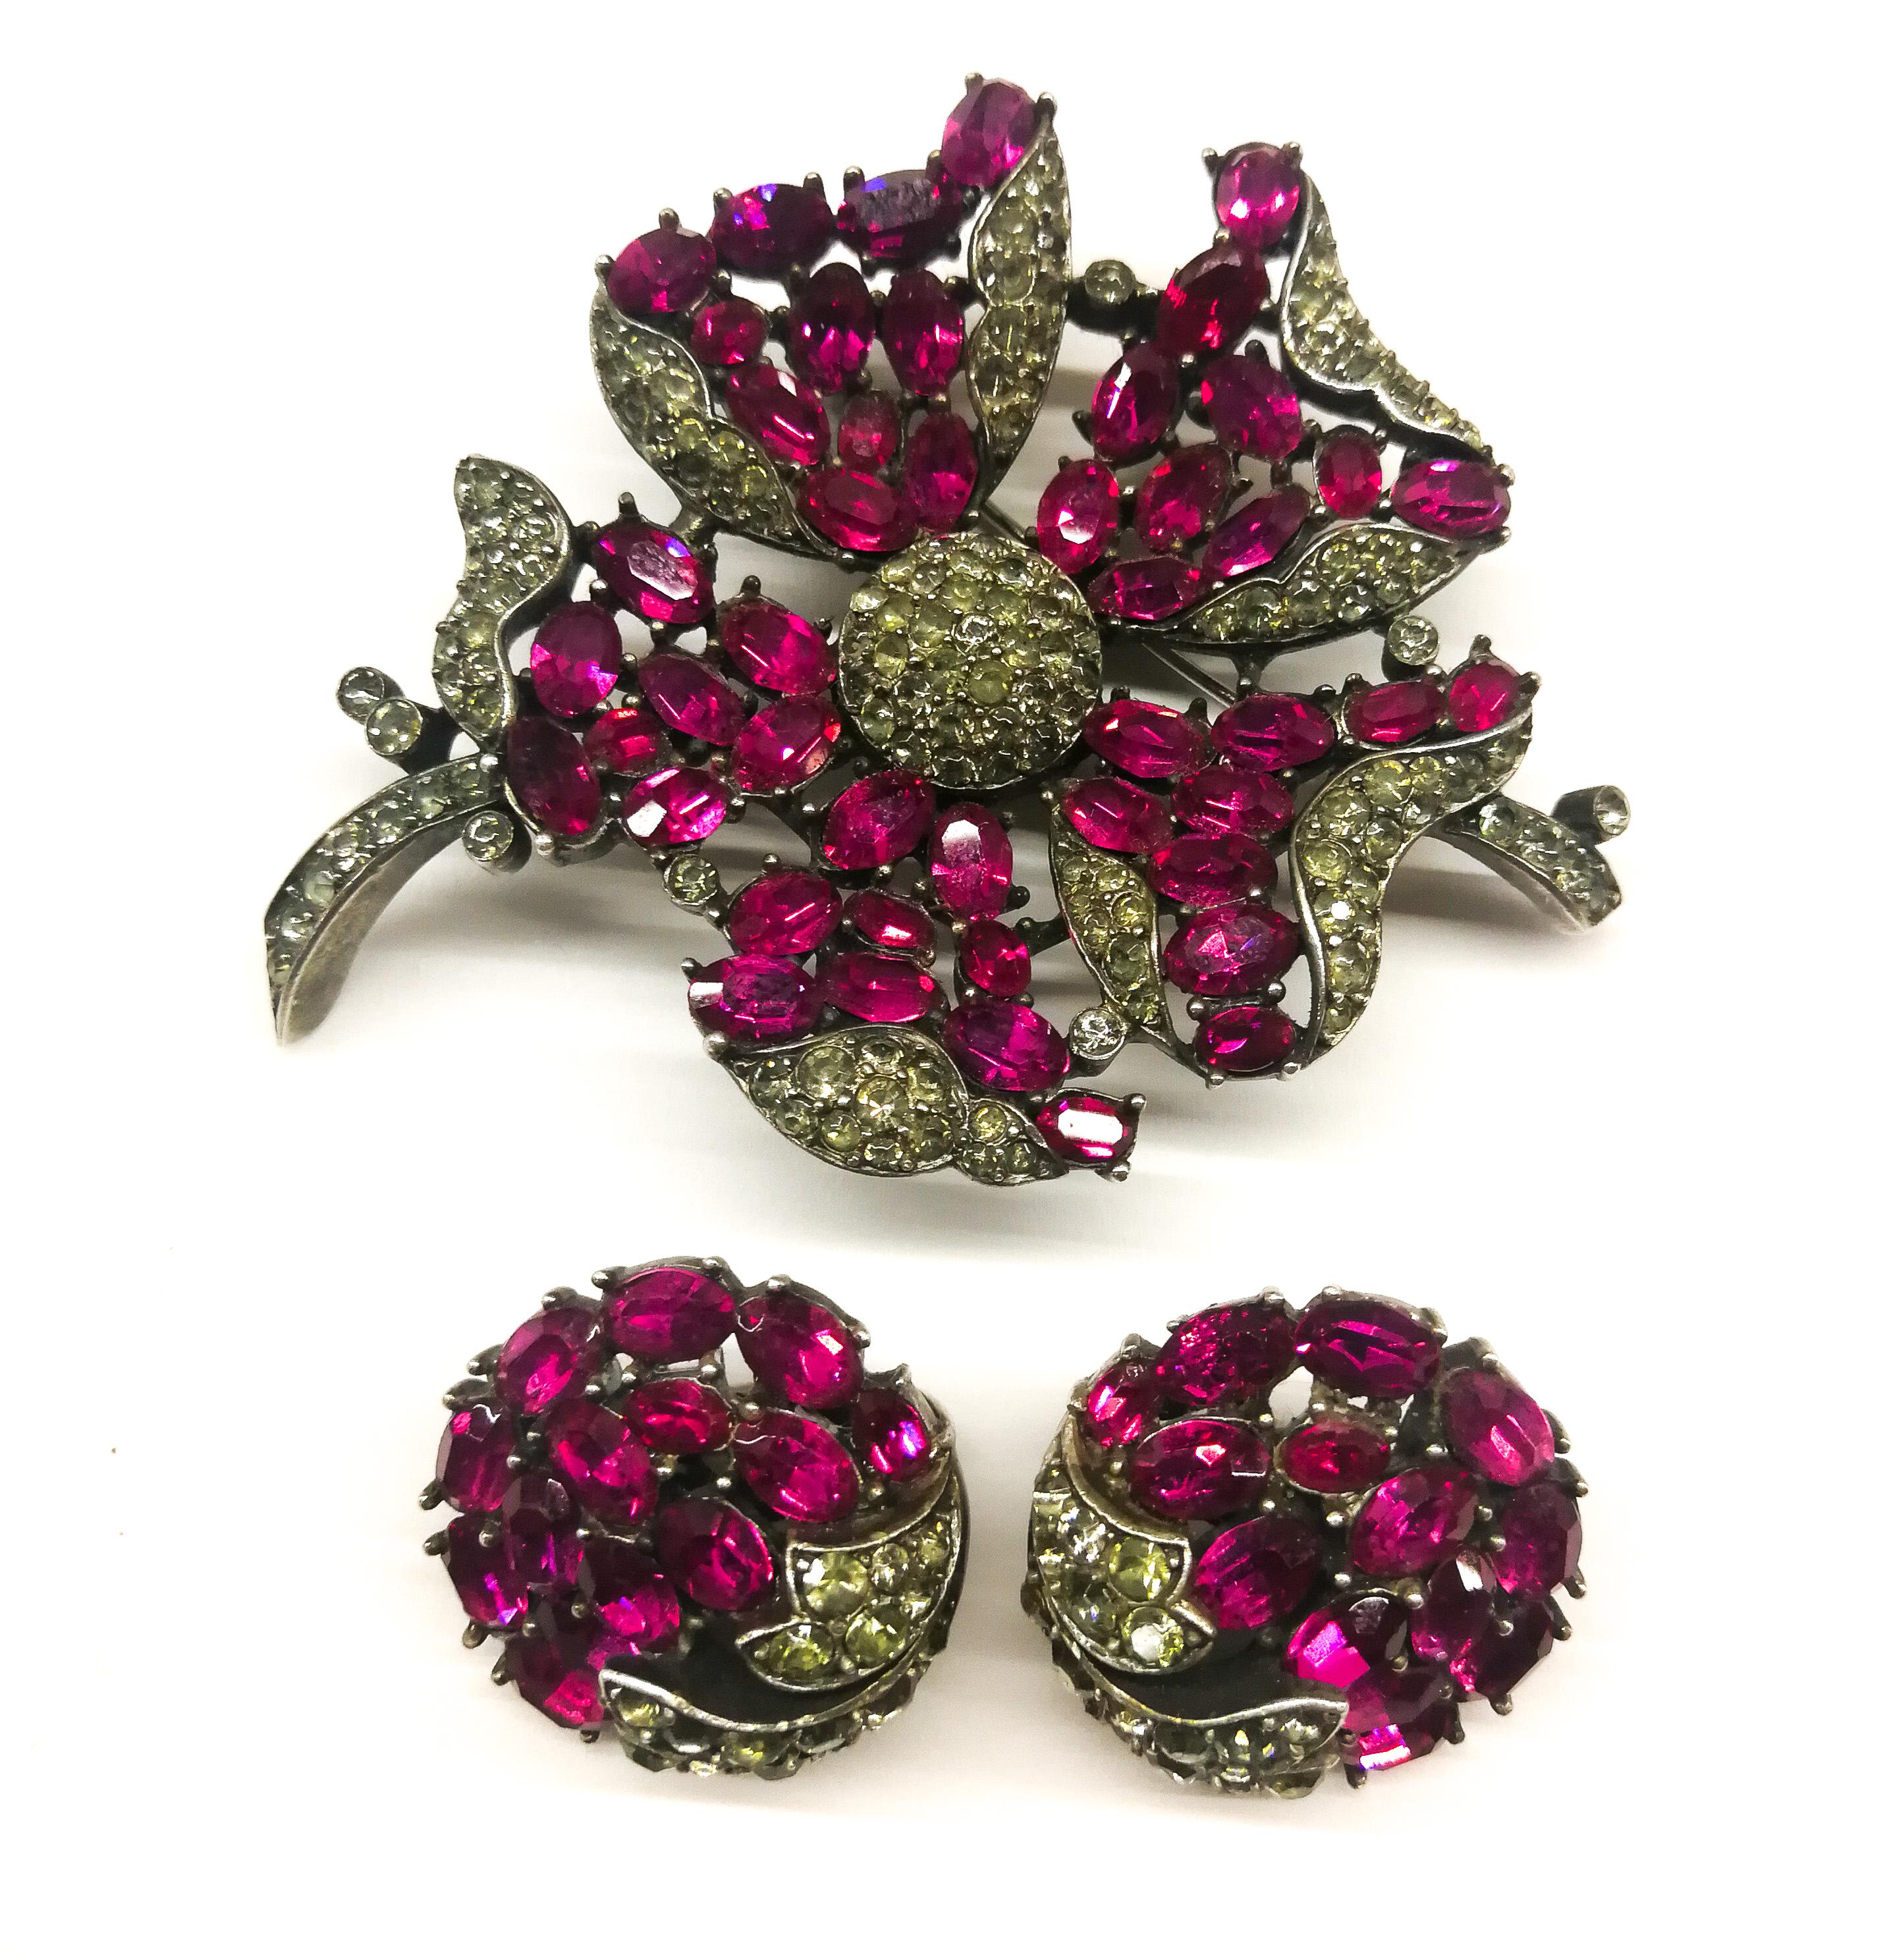 An exquisite brooch and matching earrings, designed by Alfred Philippe for Trifari, made in a sophisticated combination of softest ruby red oval pastes and round grey pastes, set in a burnished silvered metal, in a highly stylised floral design,